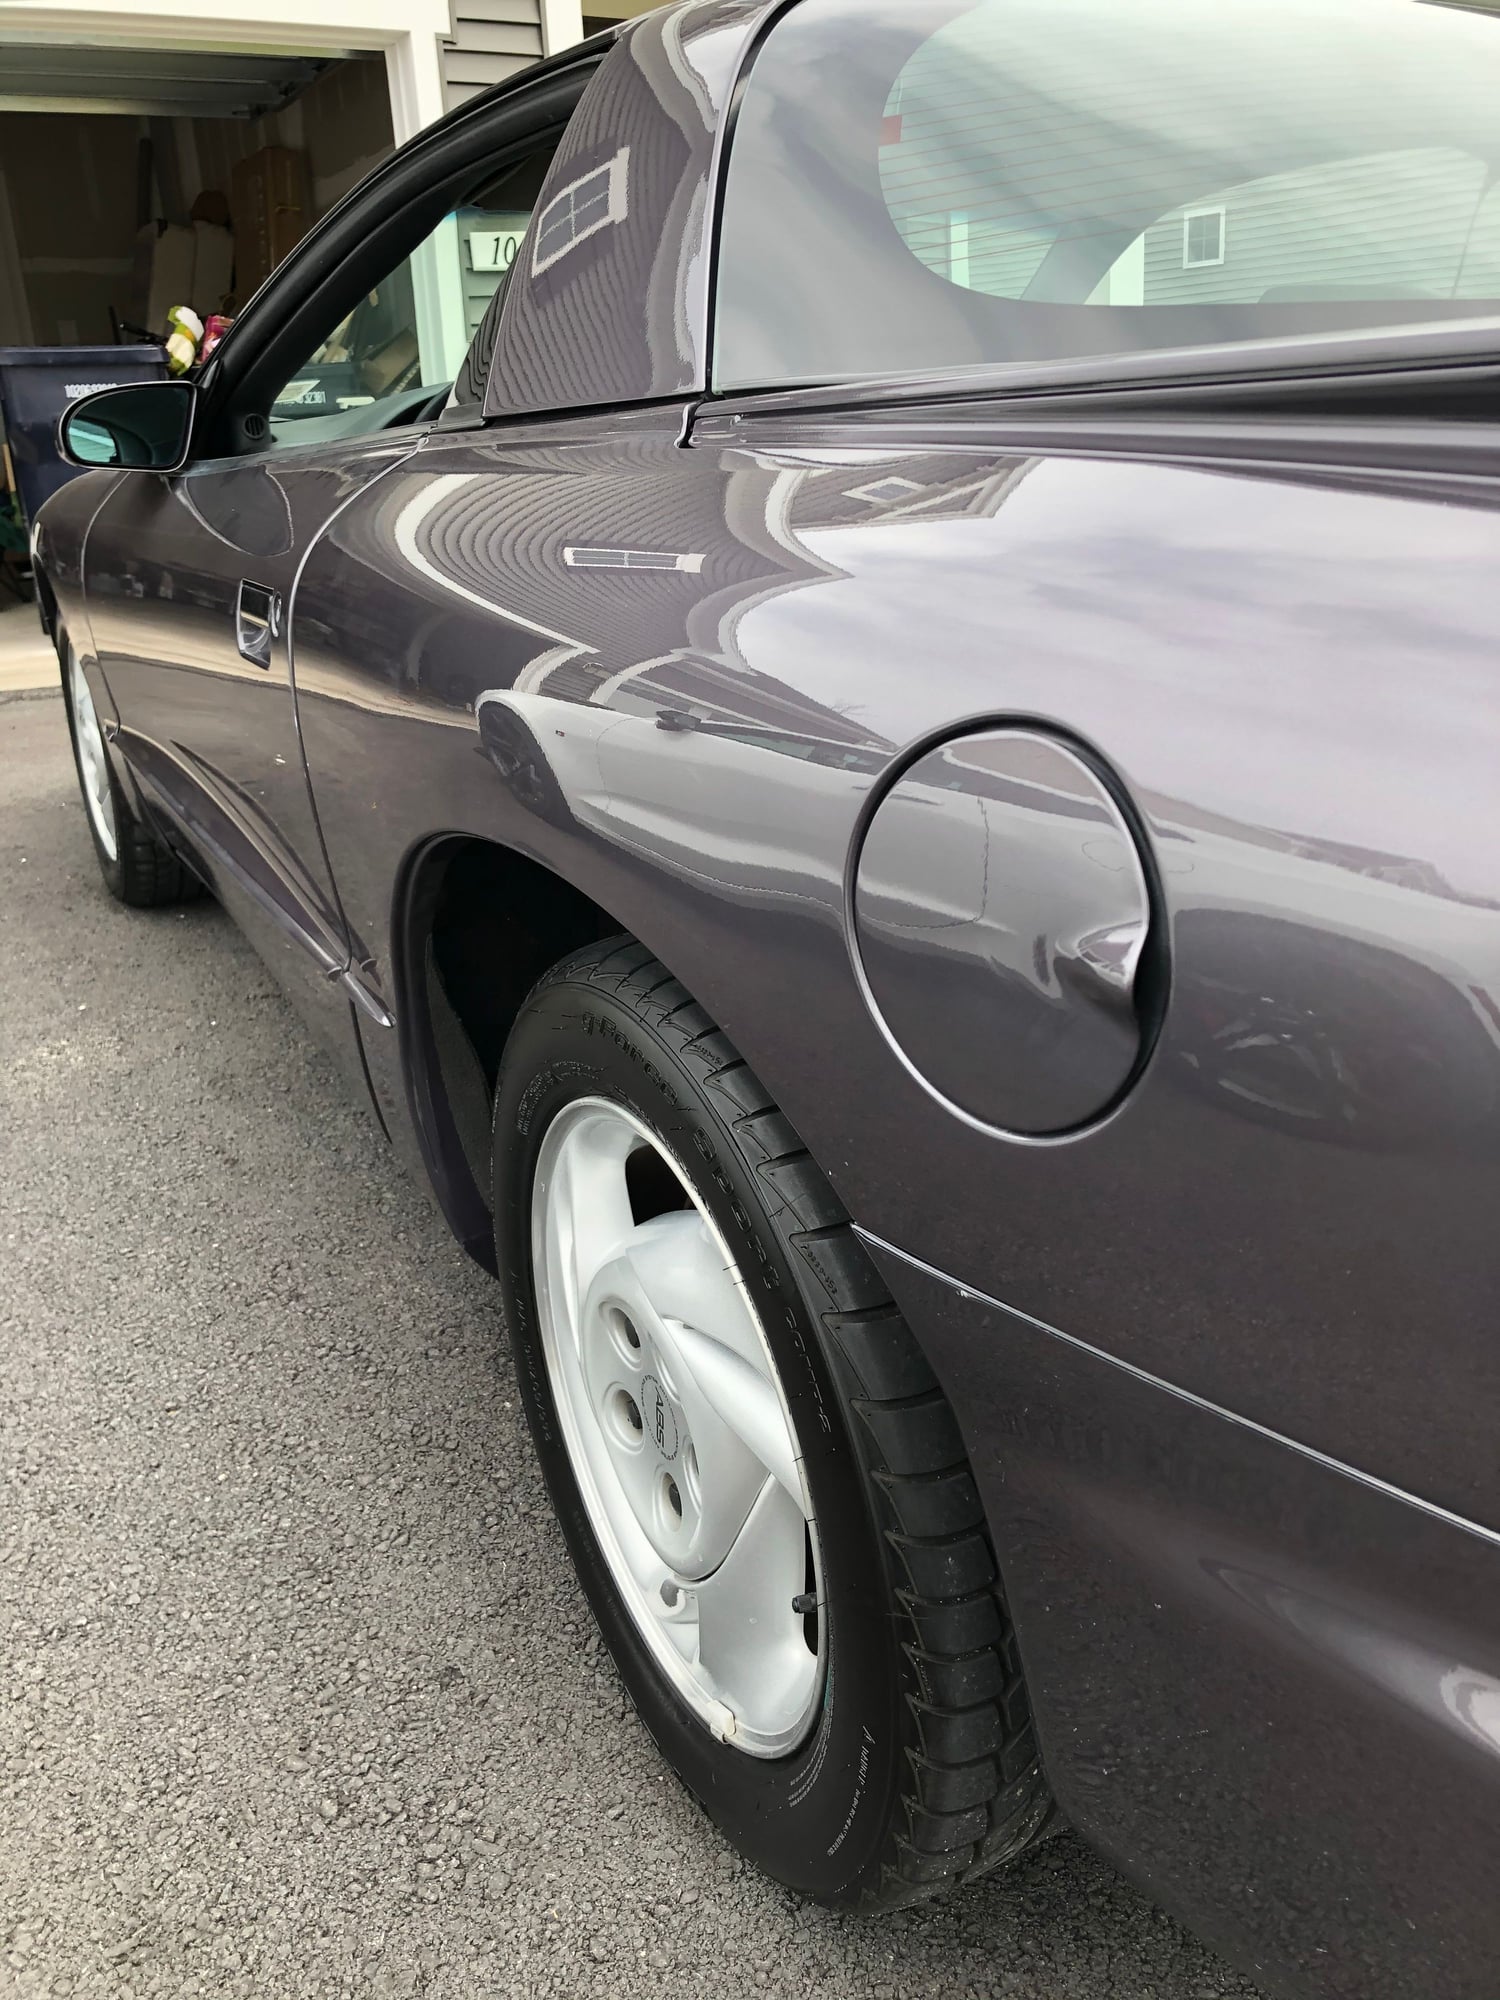 1994 Pontiac Firebird - 1994 Firebird Formula, 1-owner, all original - Used - VIN 2G2FV22PR42248642 - 97,000 Miles - 8 cyl - 2WD - Automatic - Coupe - Gray - Rochester, NY 14586, United States